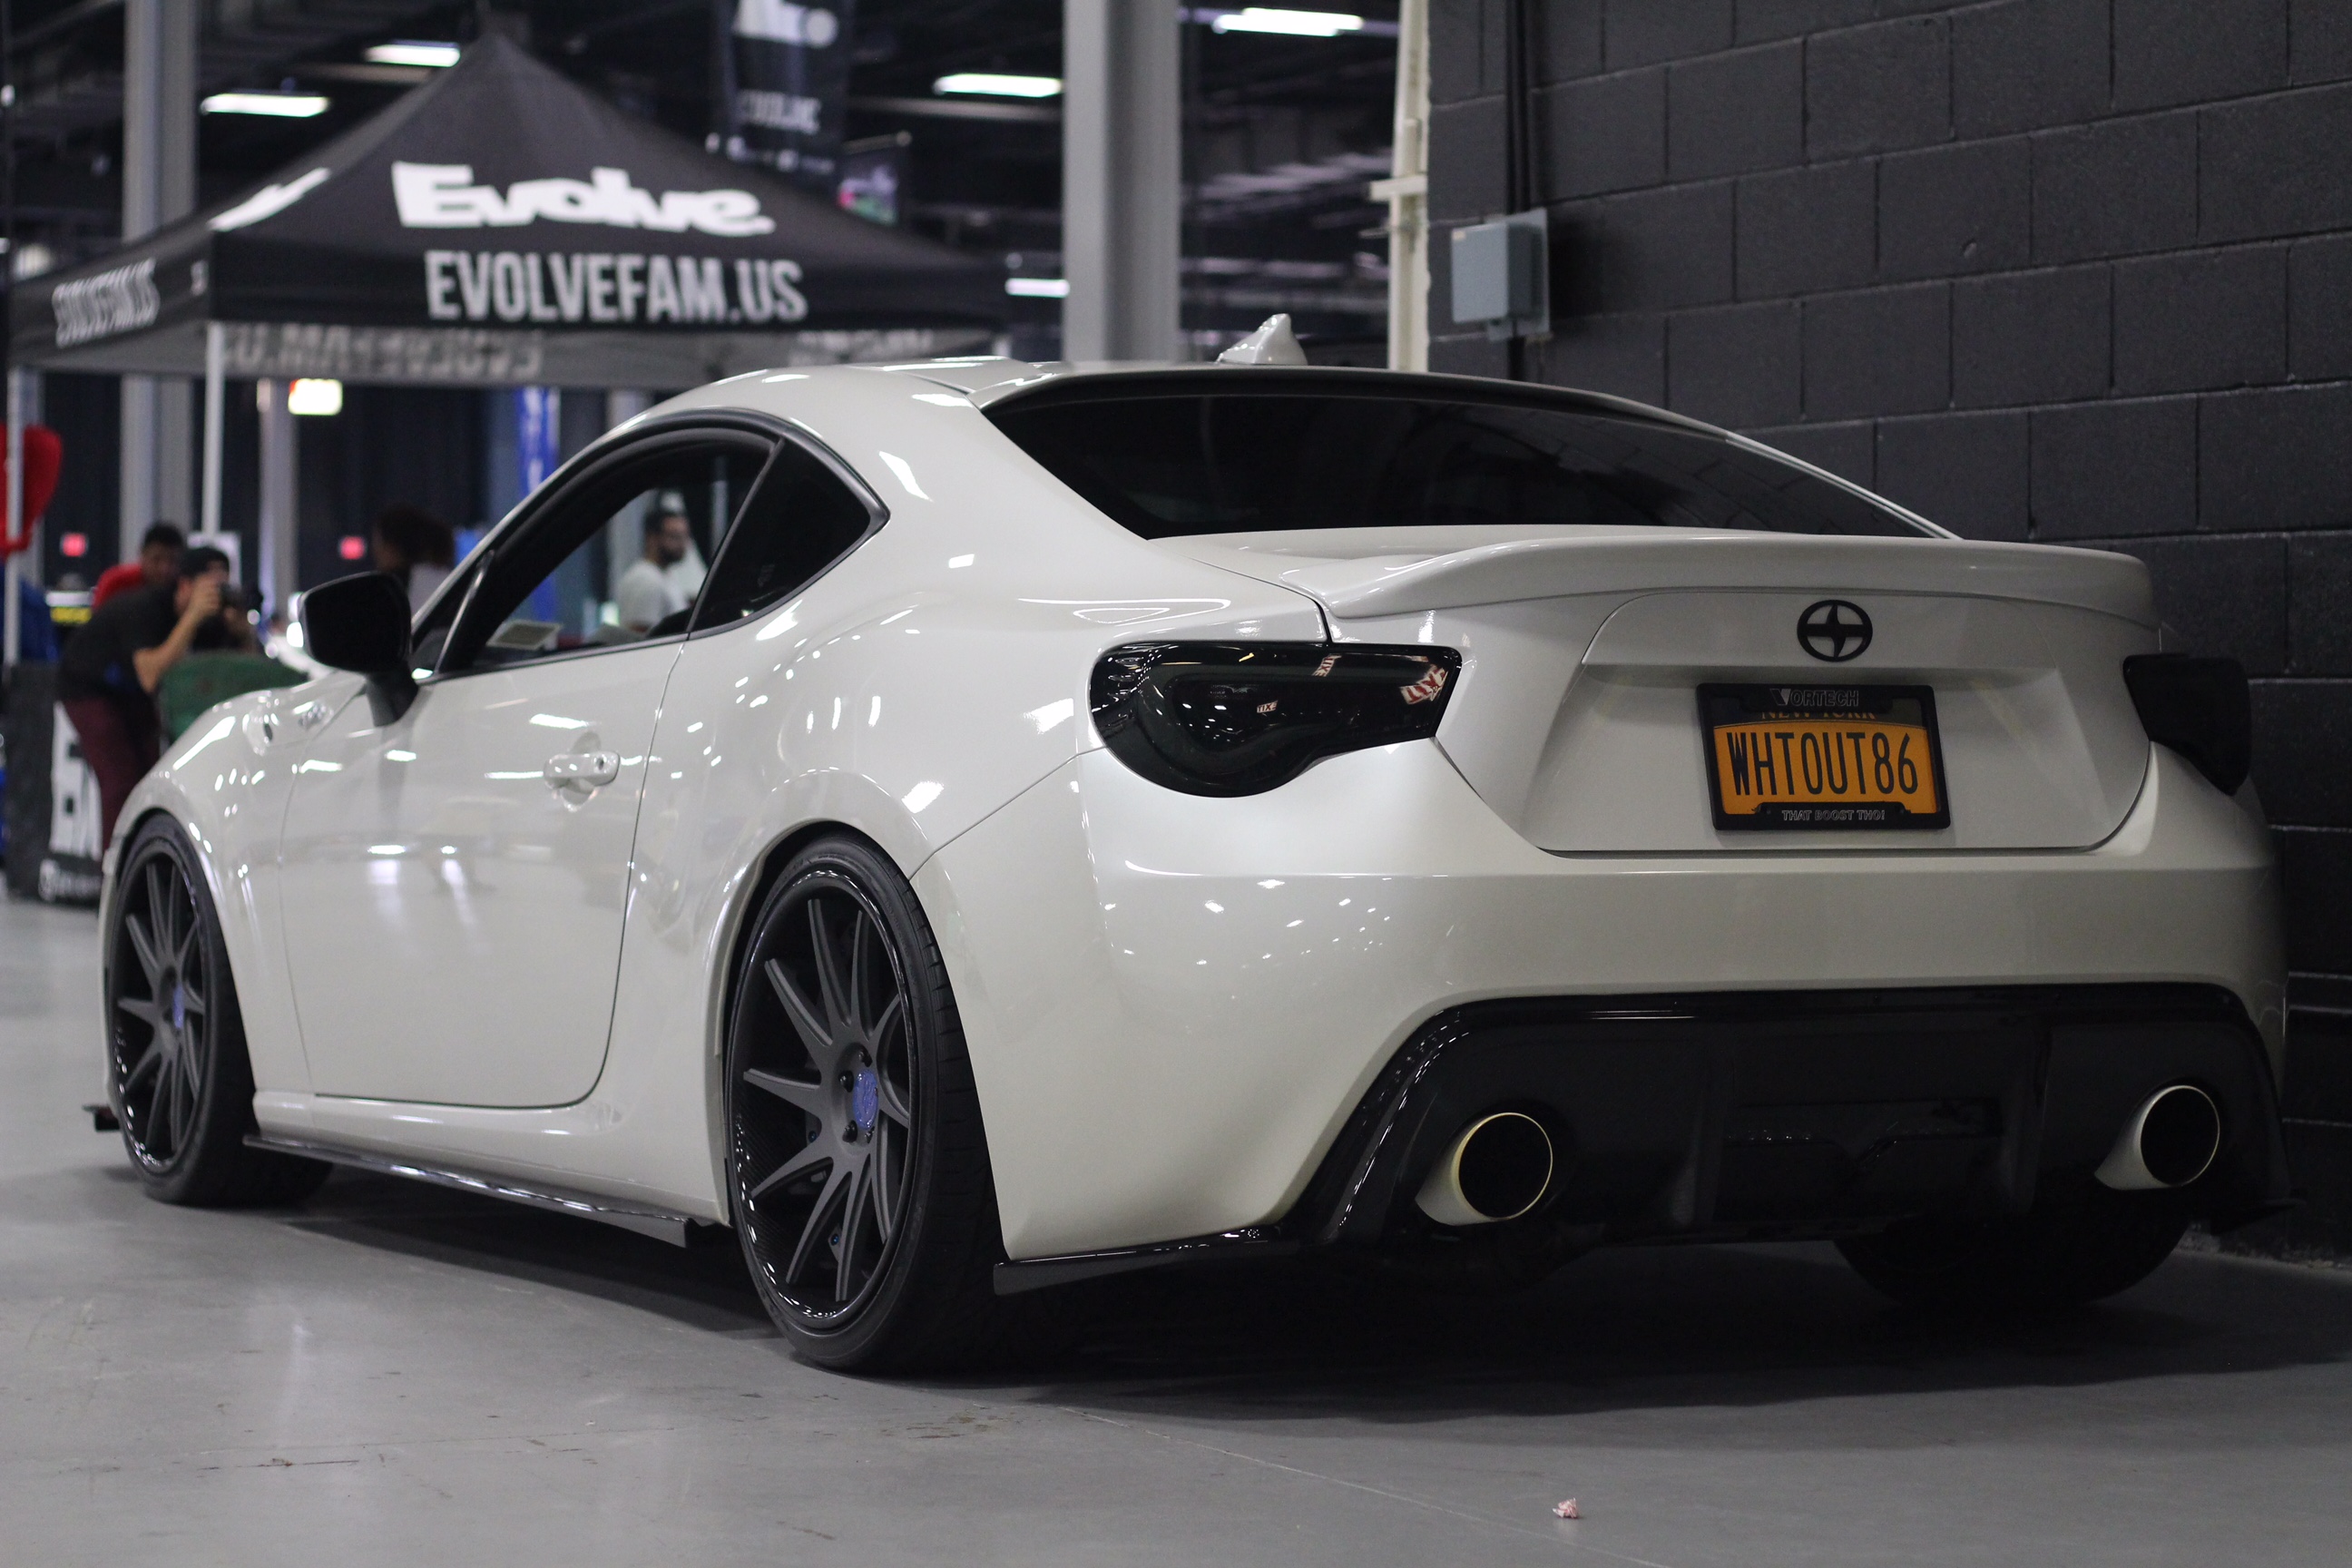 Cliff's Supercharged 2014 "Whiteout" Scion FRS